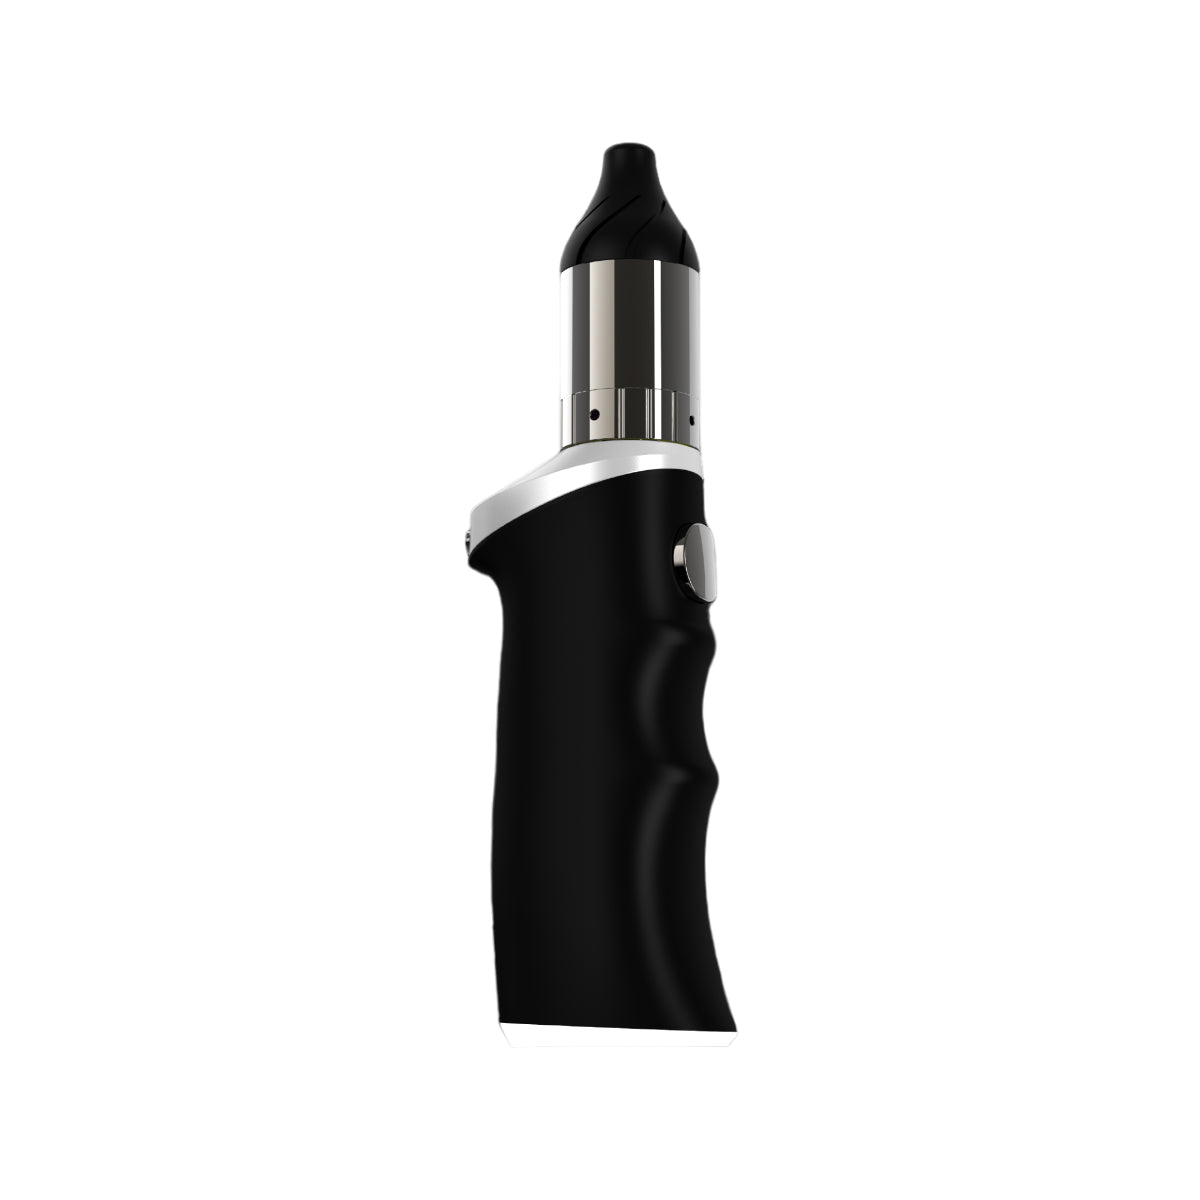 Yocan Black Phaser Ace Wax Vaporizer - Silver wholesale